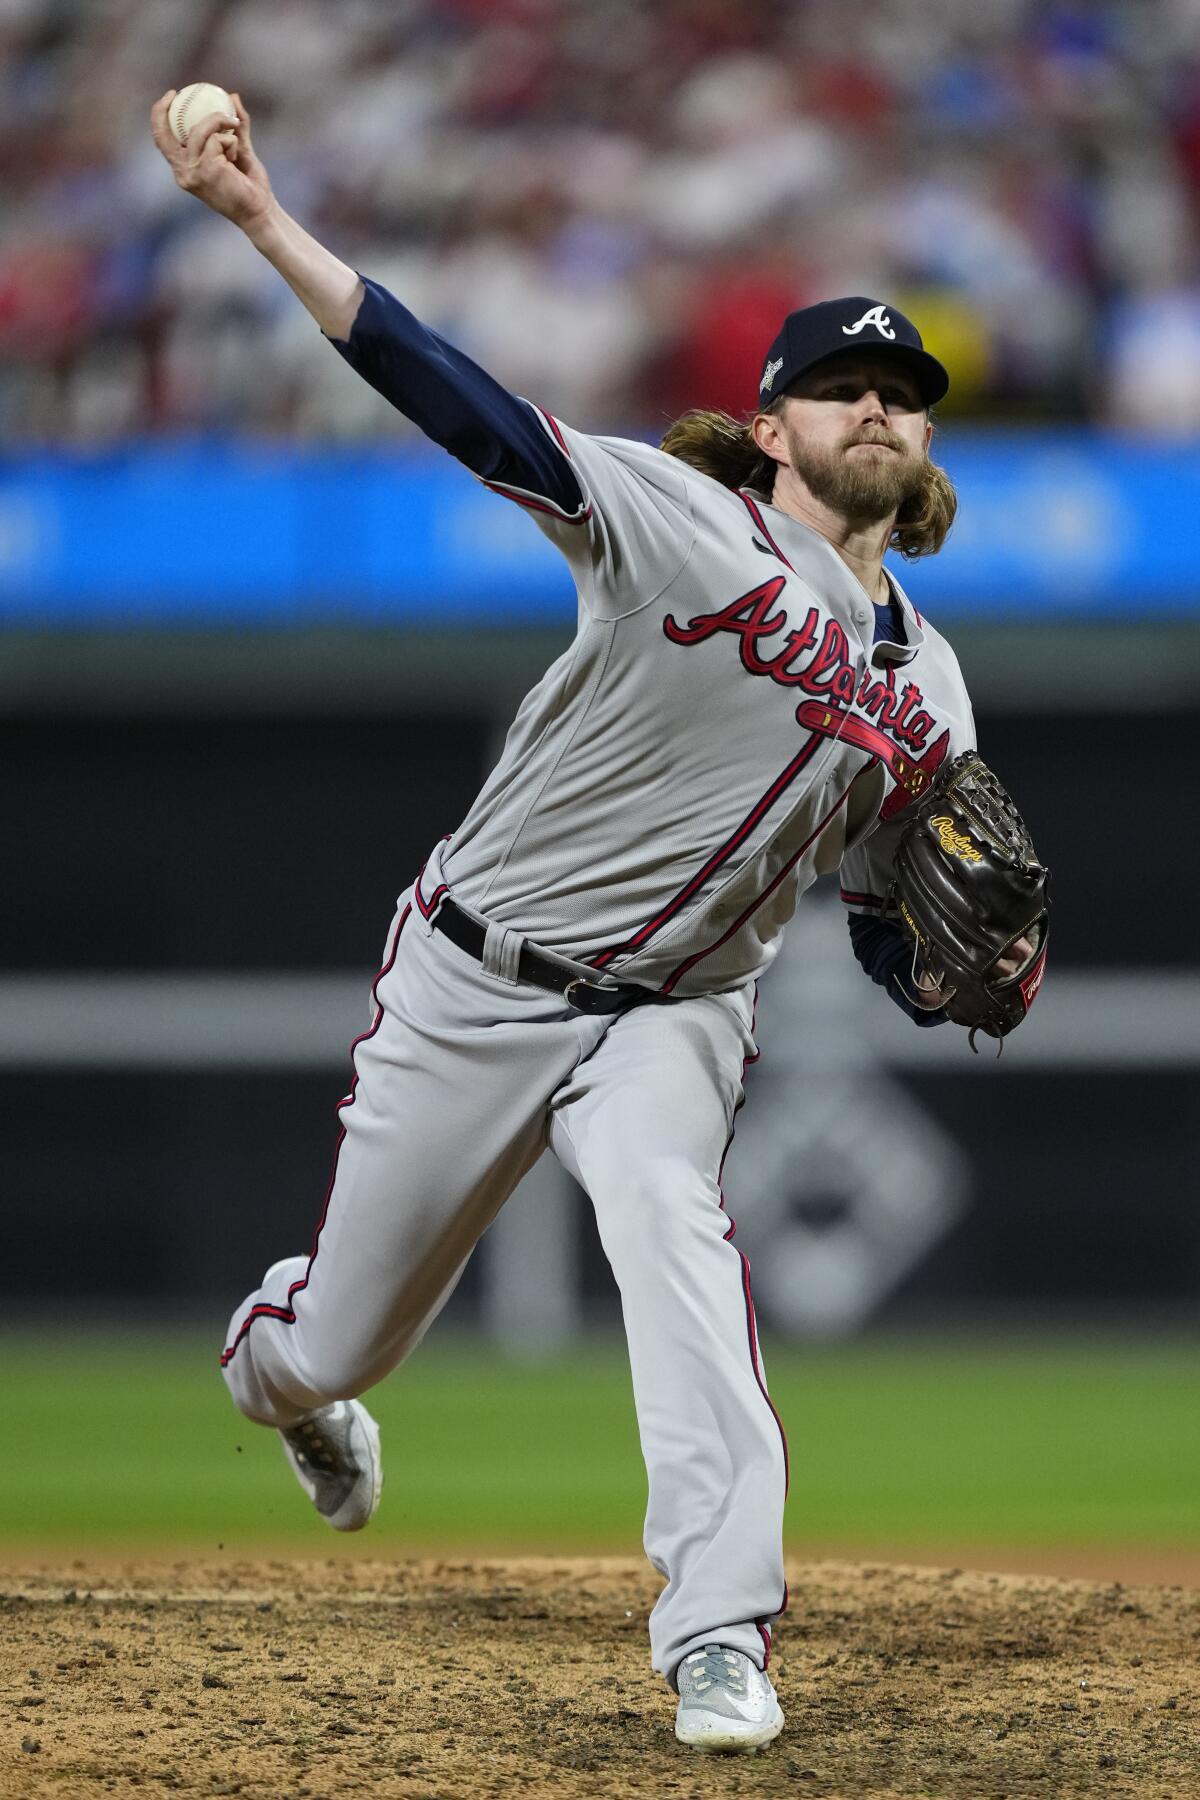 2023 Atlanta Braves players who could have a big year